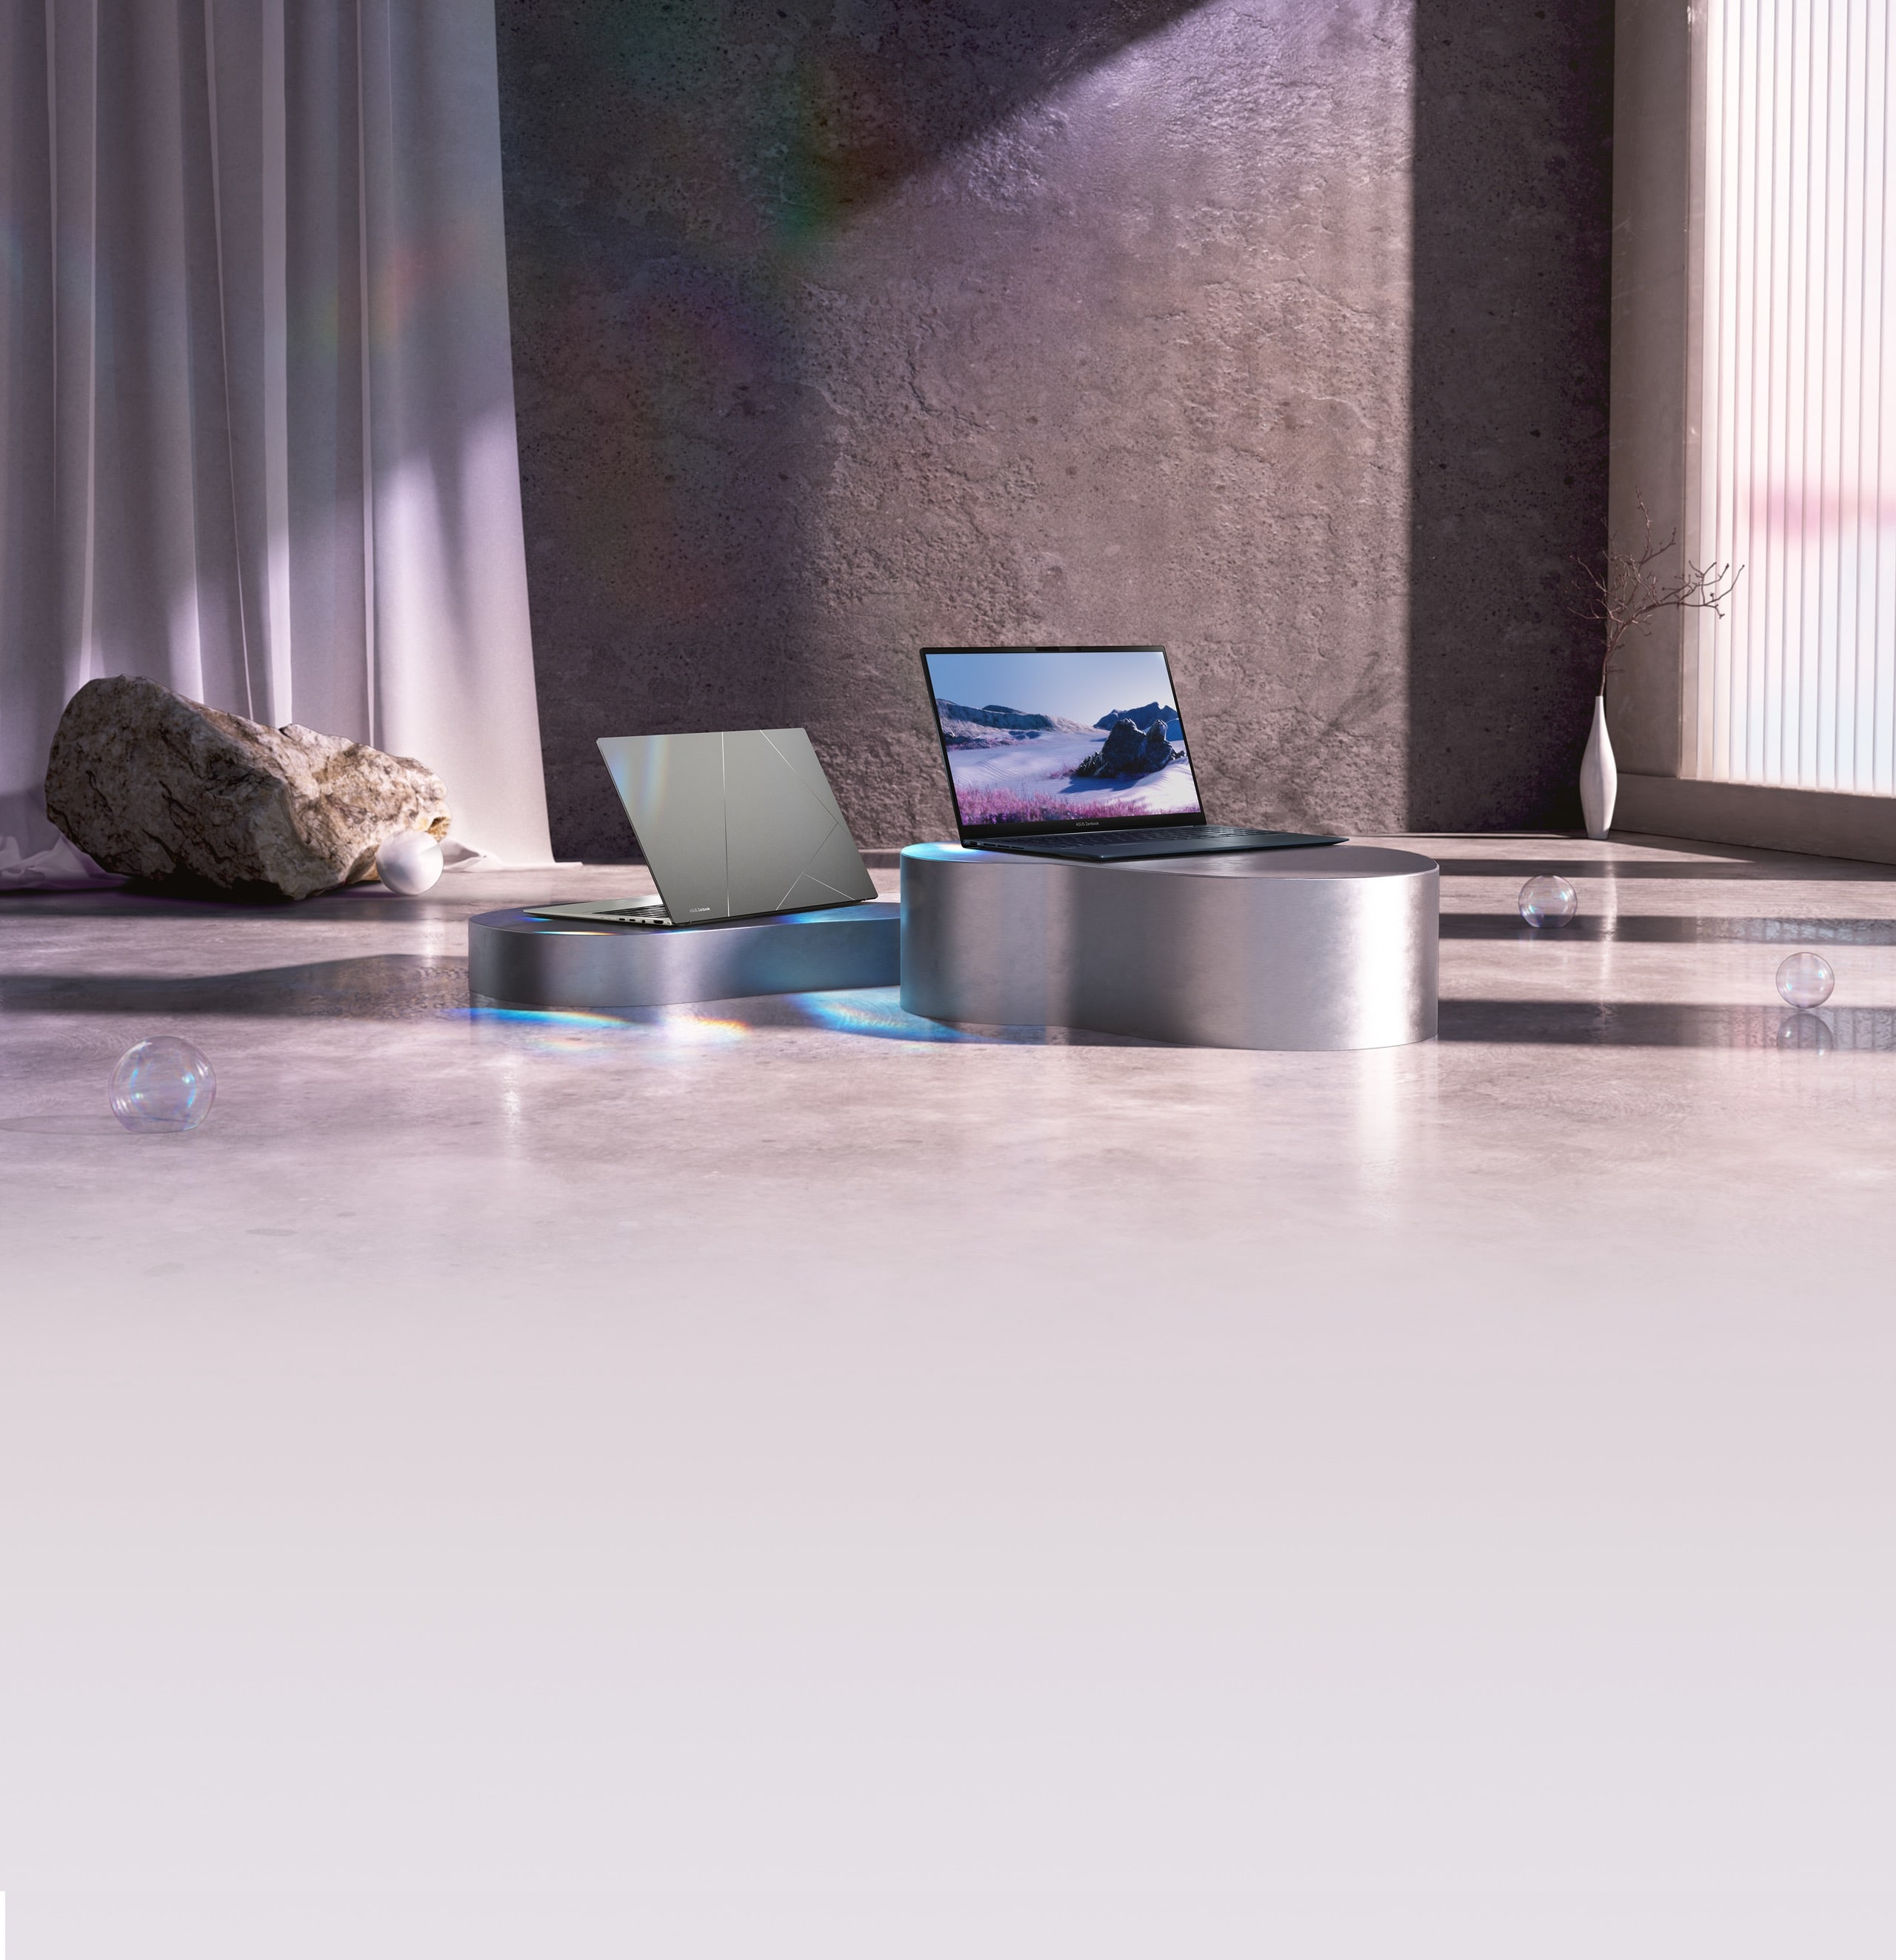 Two Zenbook 15 OLED laptops in Basalt Gray and Ponder Blue colors on metal podiums with dark a concrete wall and a curtain in the background.